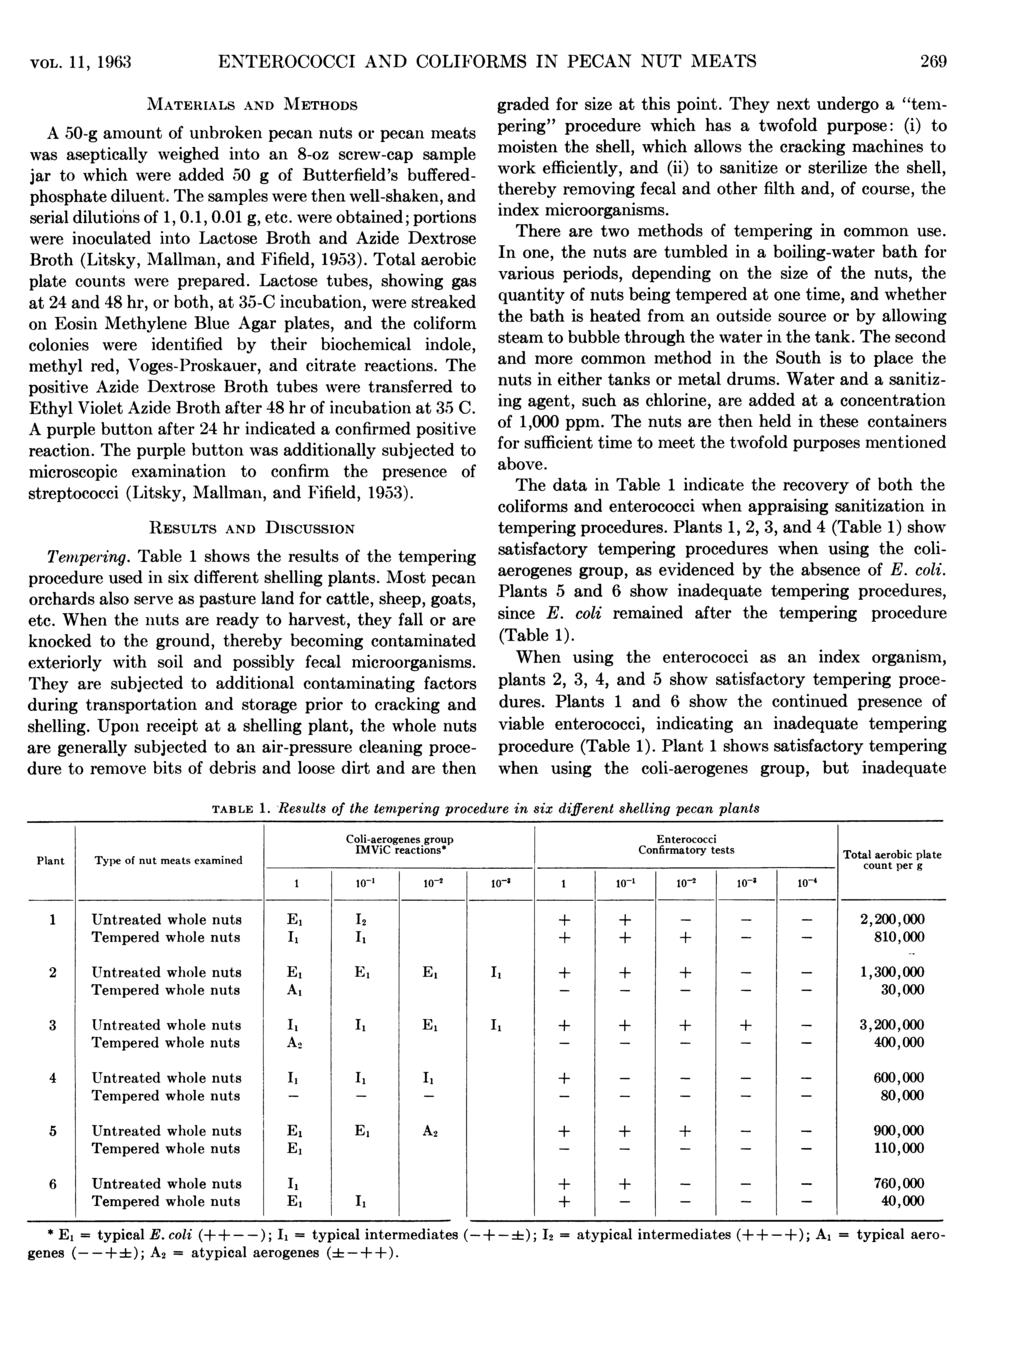 VOL. 11l 1 963 ENTEROCOCCI AND COLIFORMS IN PECAN NUT MEATS 269 MATERIALS AND METHODS A 50-g amount of unbroken pecan nuts or pecan meats was aseptically weighed into an 8-oz screw-cap sample jar to